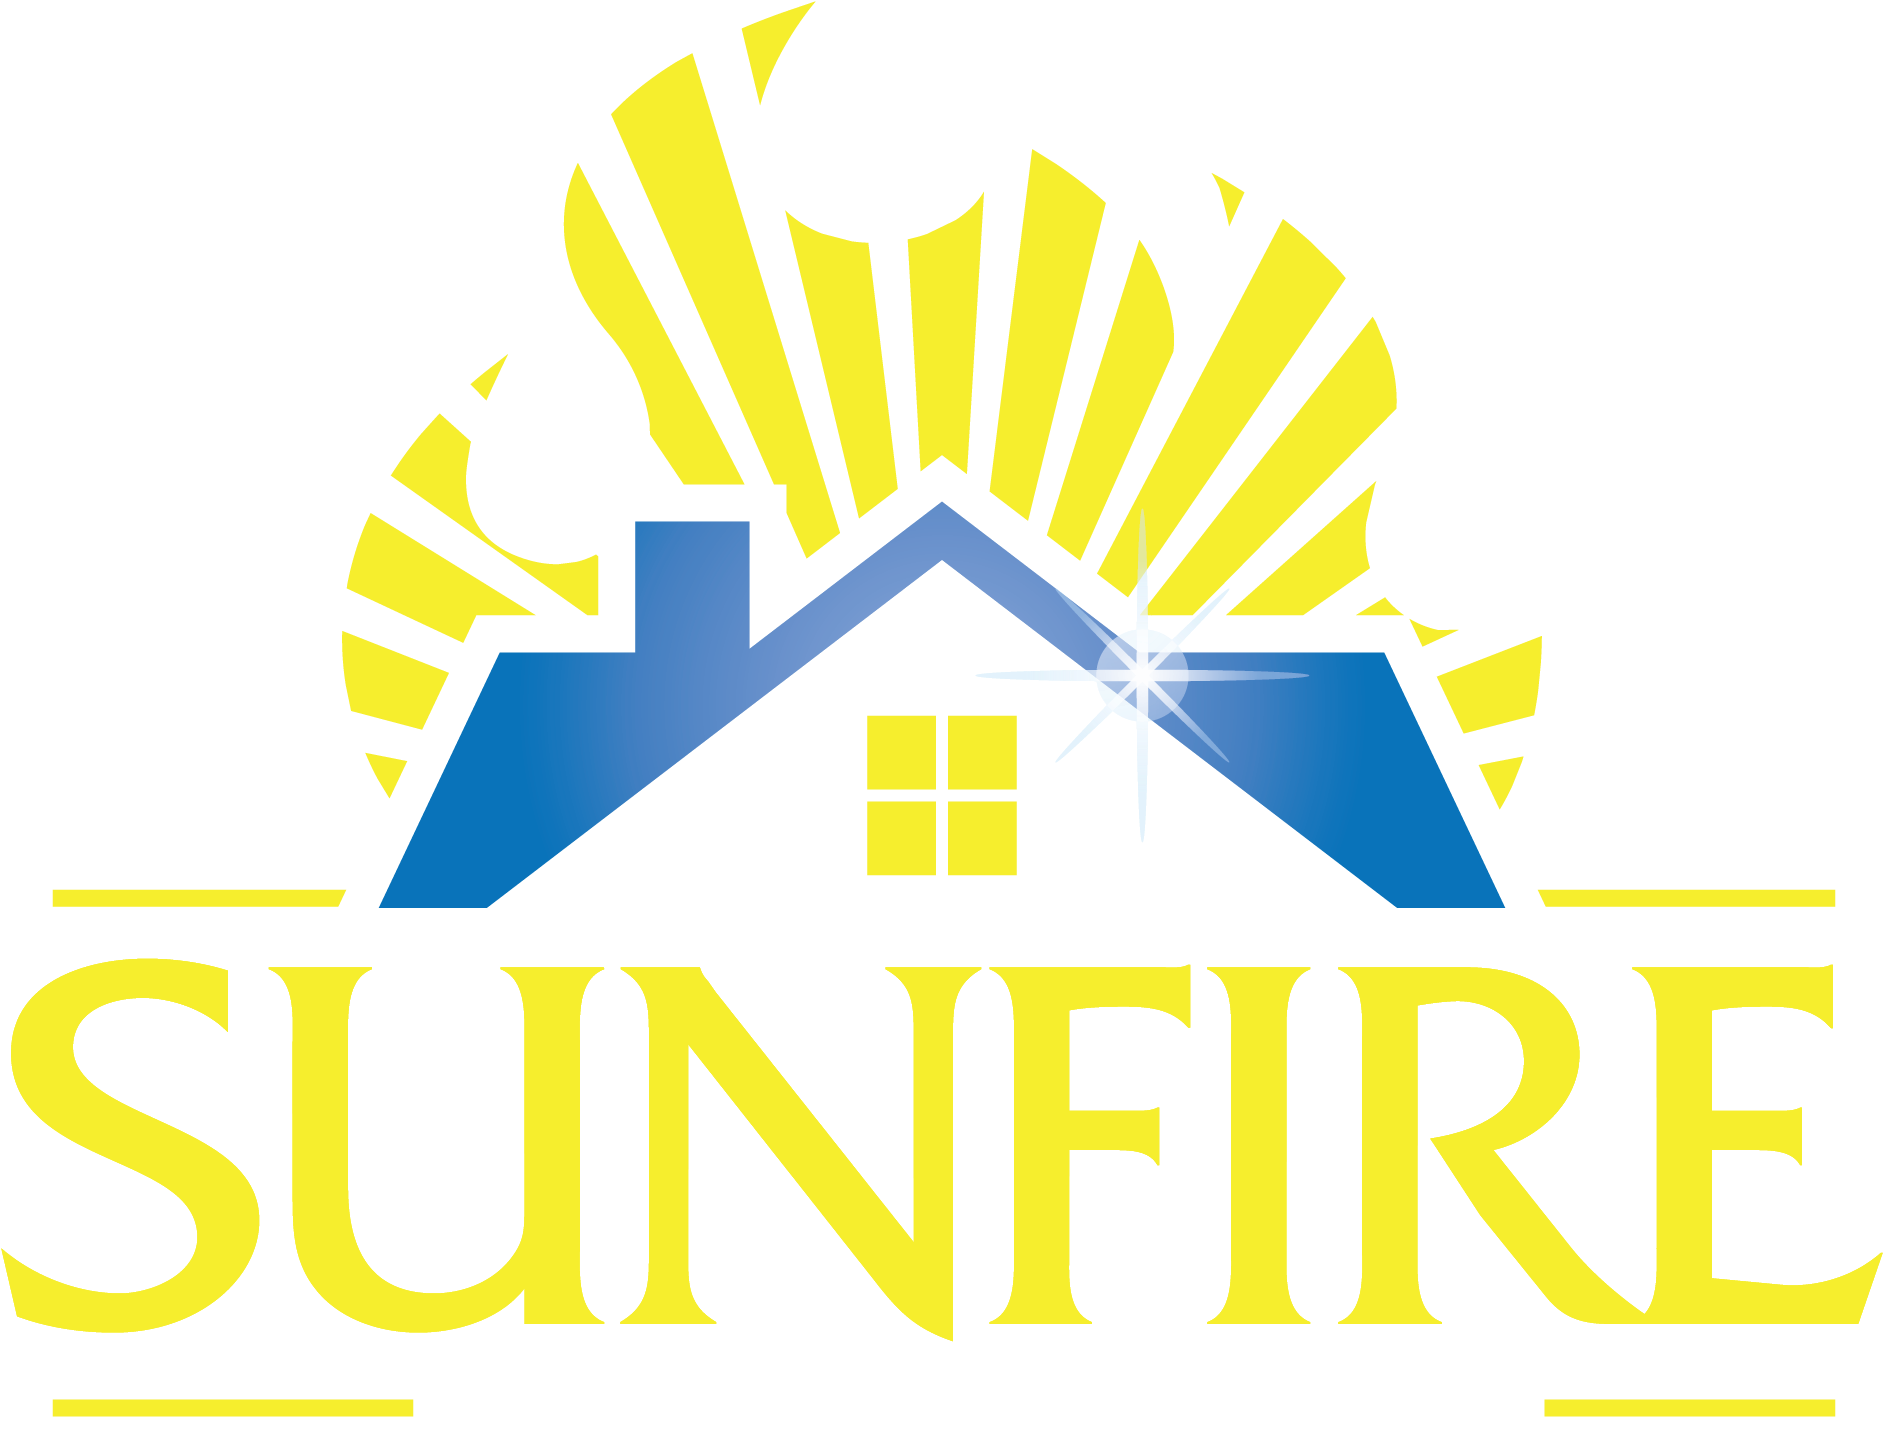 Sunfire Logo - Roof Cleaning (2130x1448)